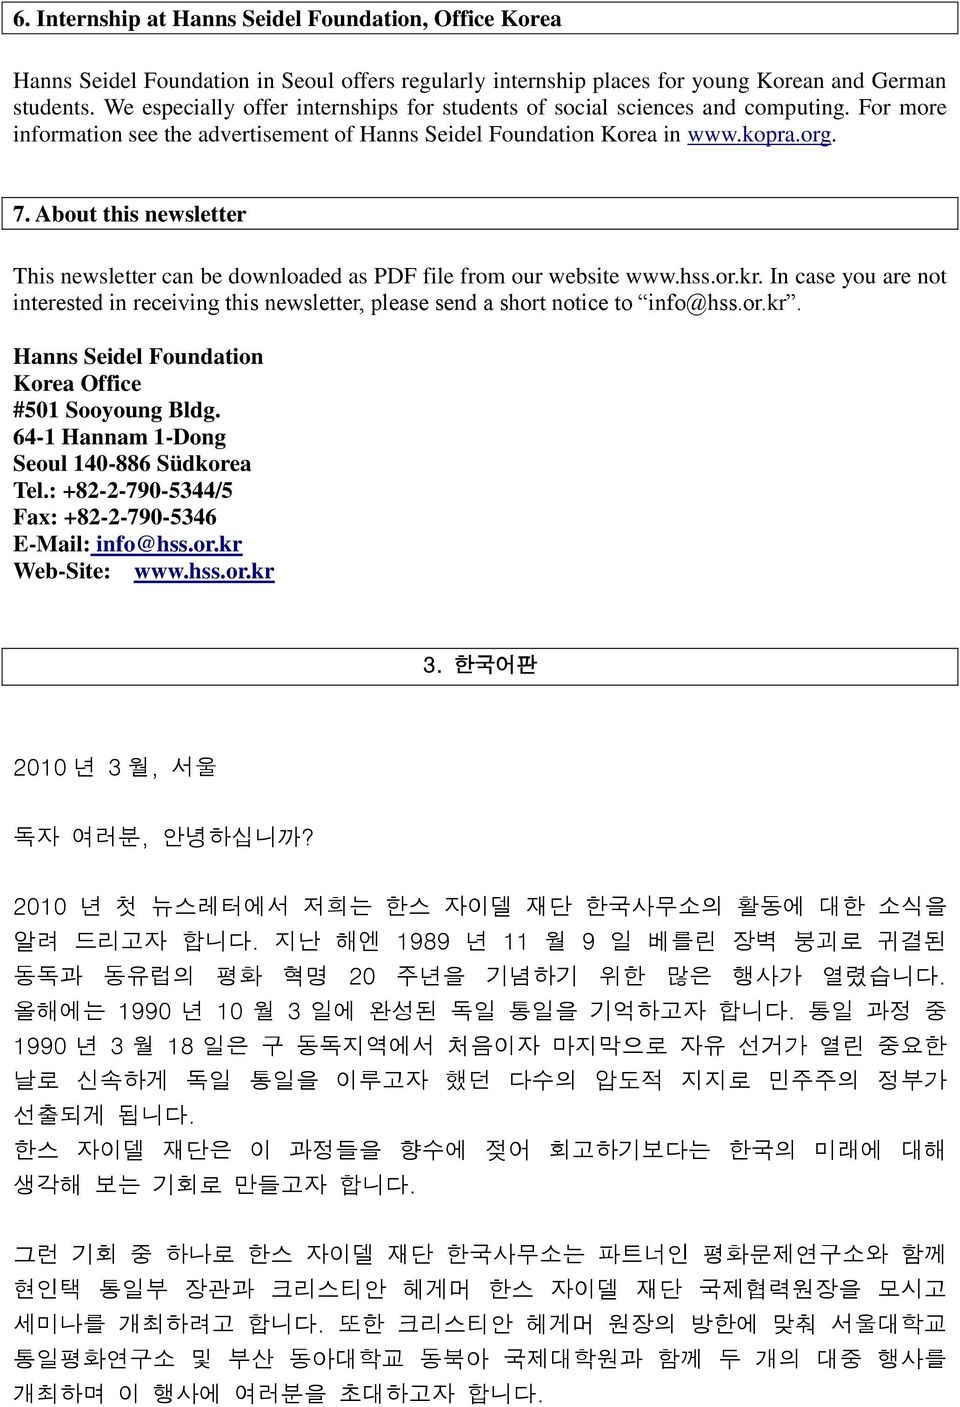 About this newsletter This newsletter can be downloaded as PDF file from our website www.hss.or.kr. In case you are not interested in receiving this newsletter, please send a short notice to info@hss.